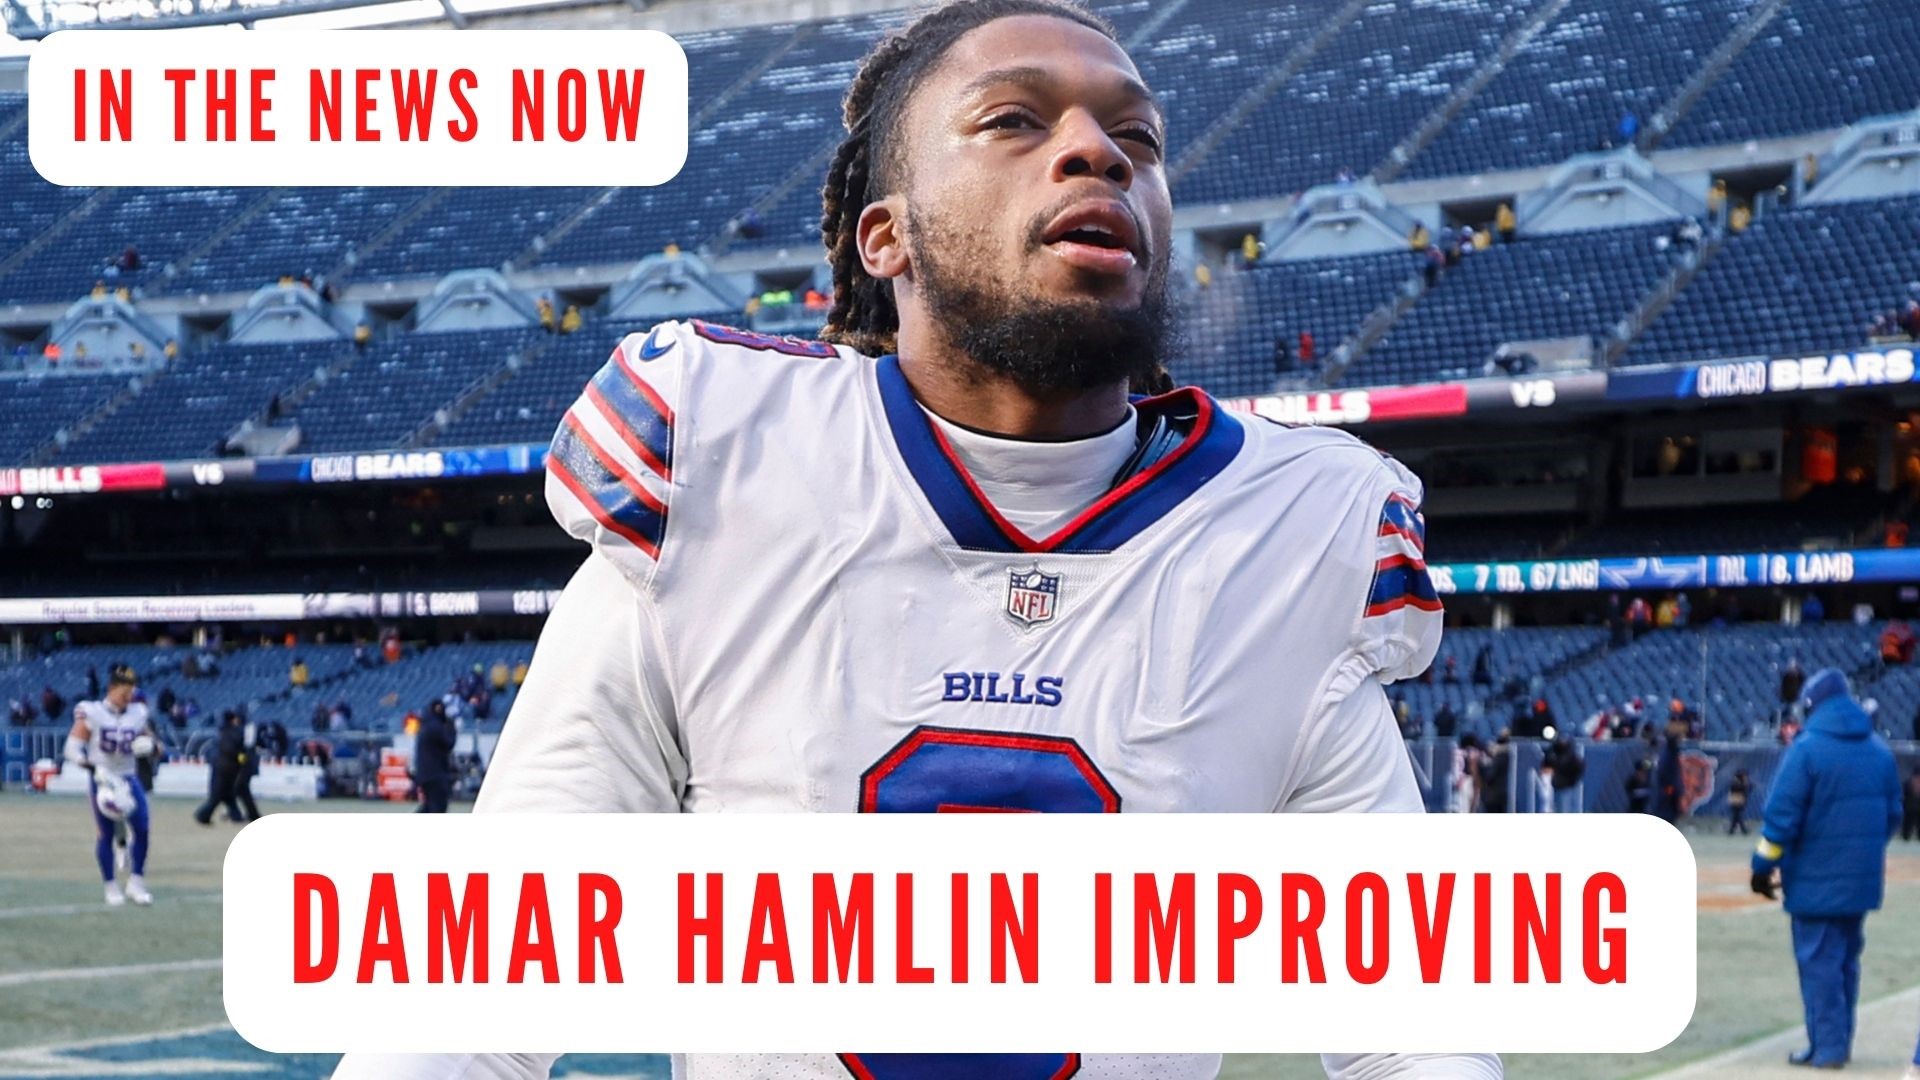 The latest update as of January 6, 2023 on Bills's safety Damar Hamlin after he collapsed on the field.